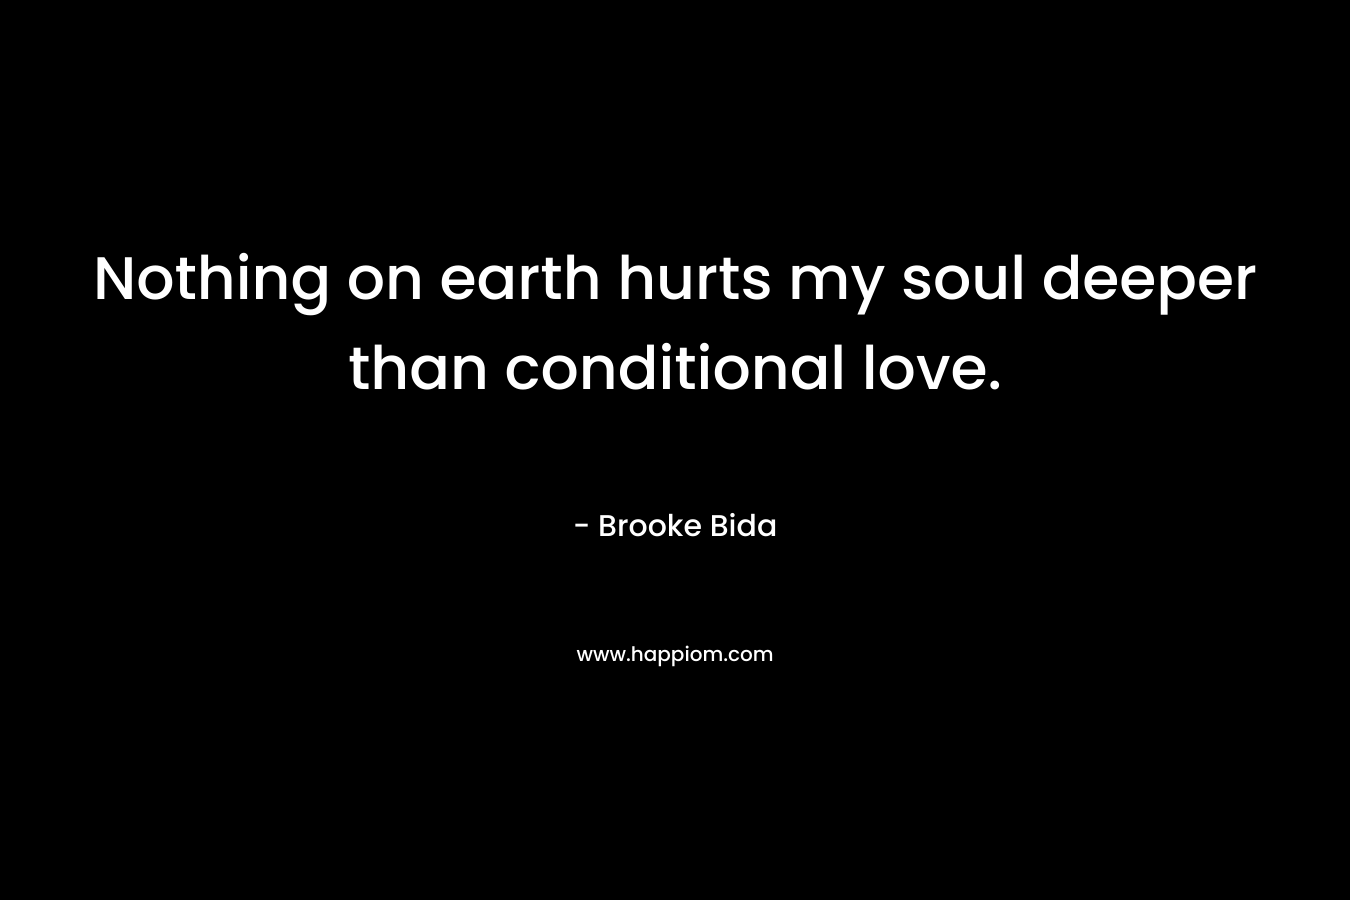 Nothing on earth hurts my soul deeper than conditional love. – Brooke Bida